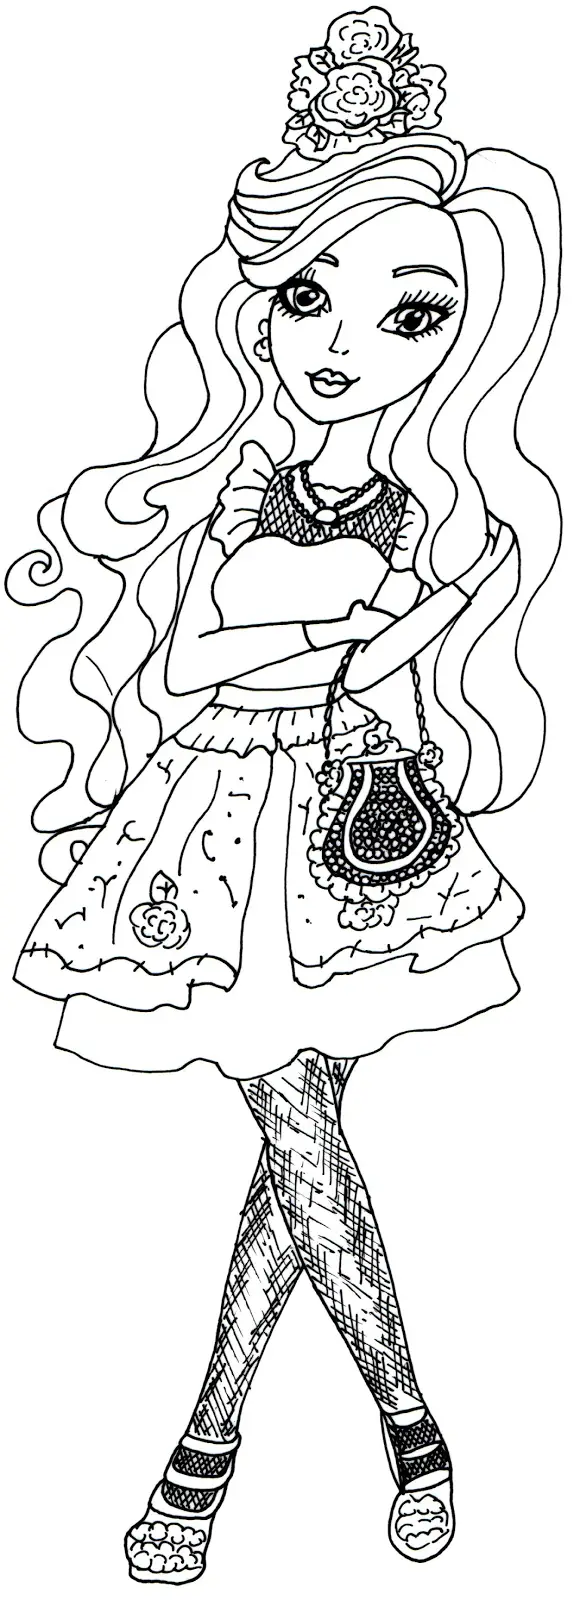 ever after high coloring pageever after high hat-tastic coloring page briar beauty briar beauty